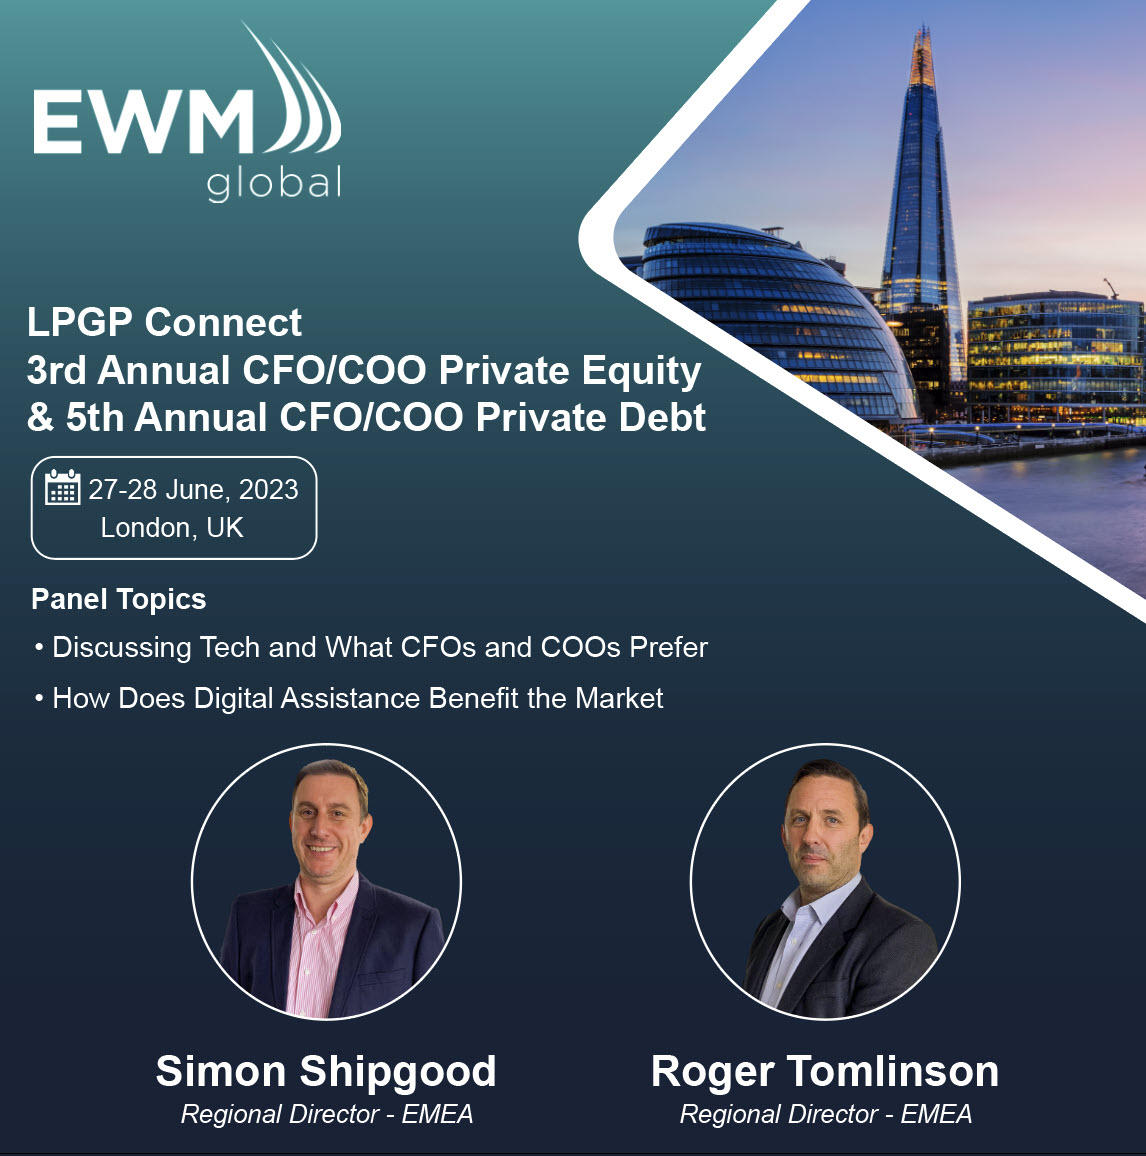 EWM Global to Sponsor LPGP 3rd Annual CFO/COO Private Equity Conference & 5th Annual CFO/COO Private Debt Conference